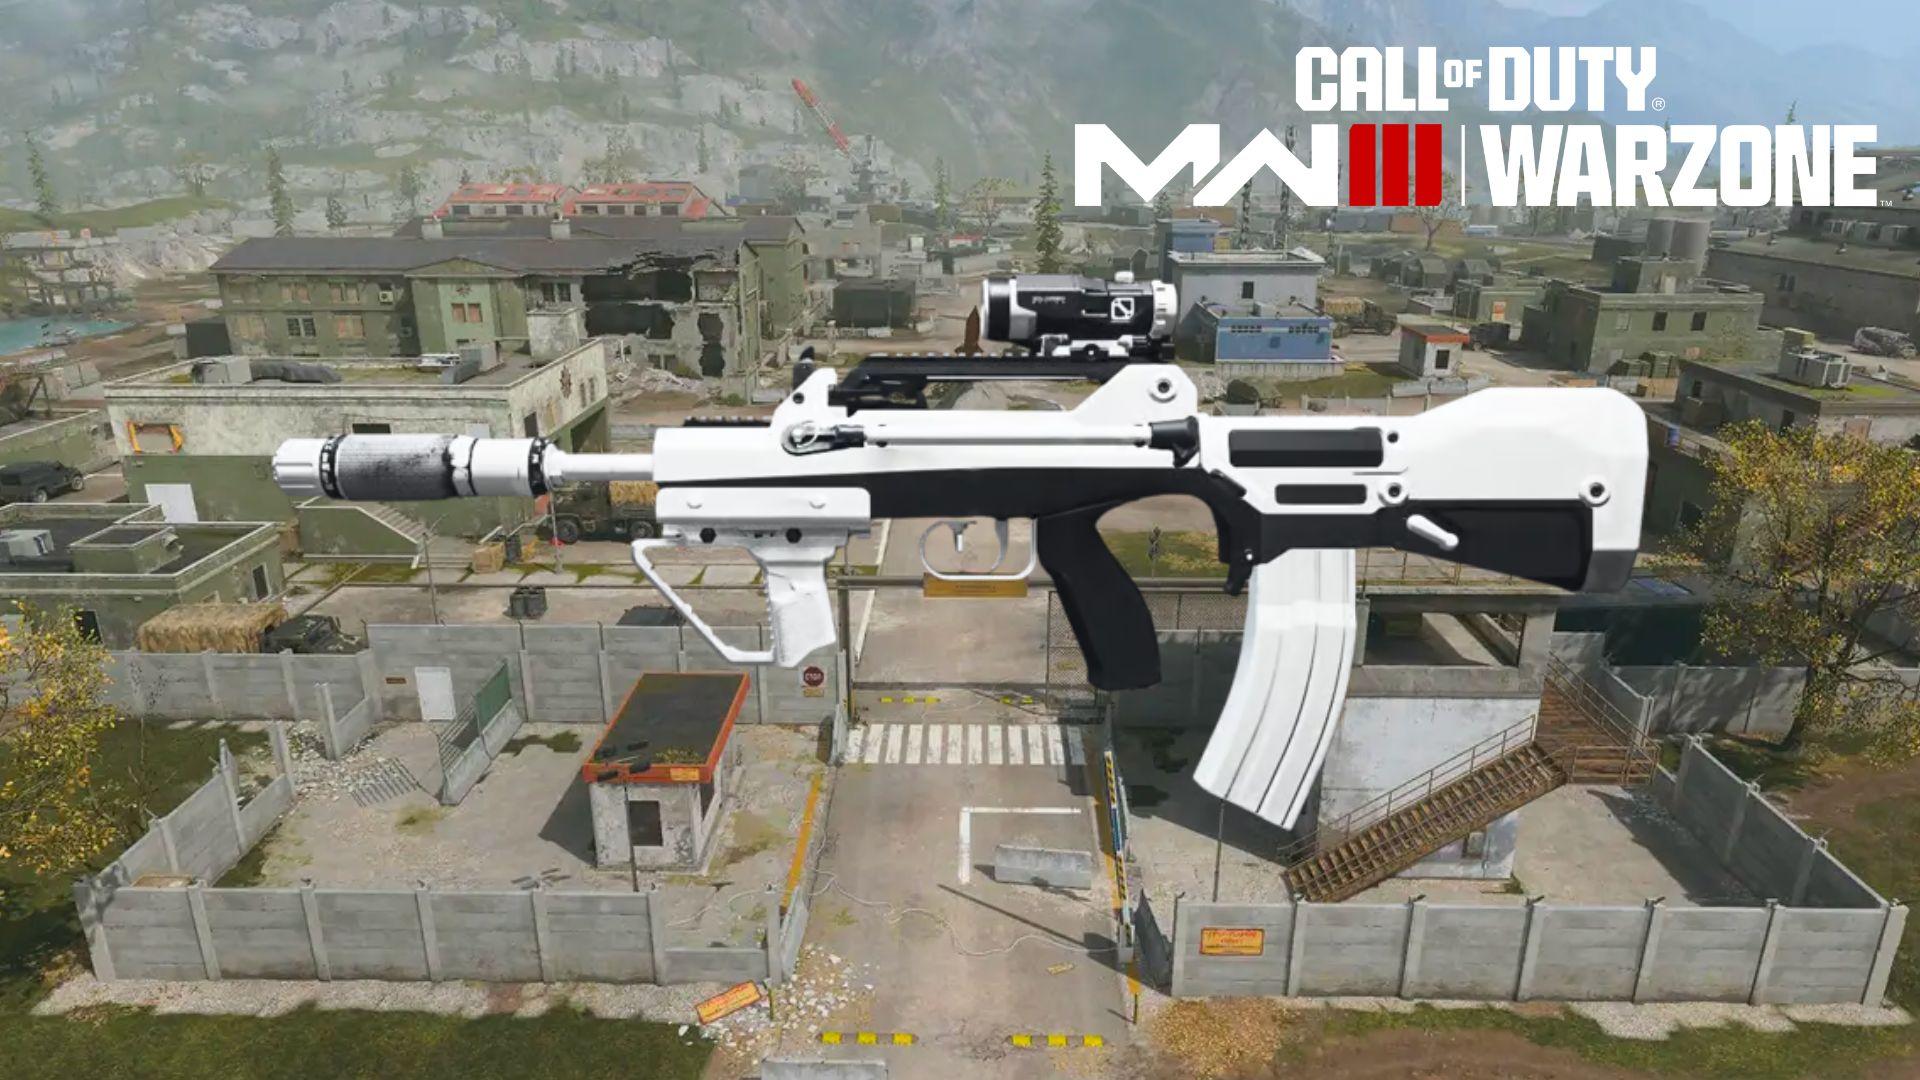 White and black FR Avancer assault rifle over Warzone's urzikstan map